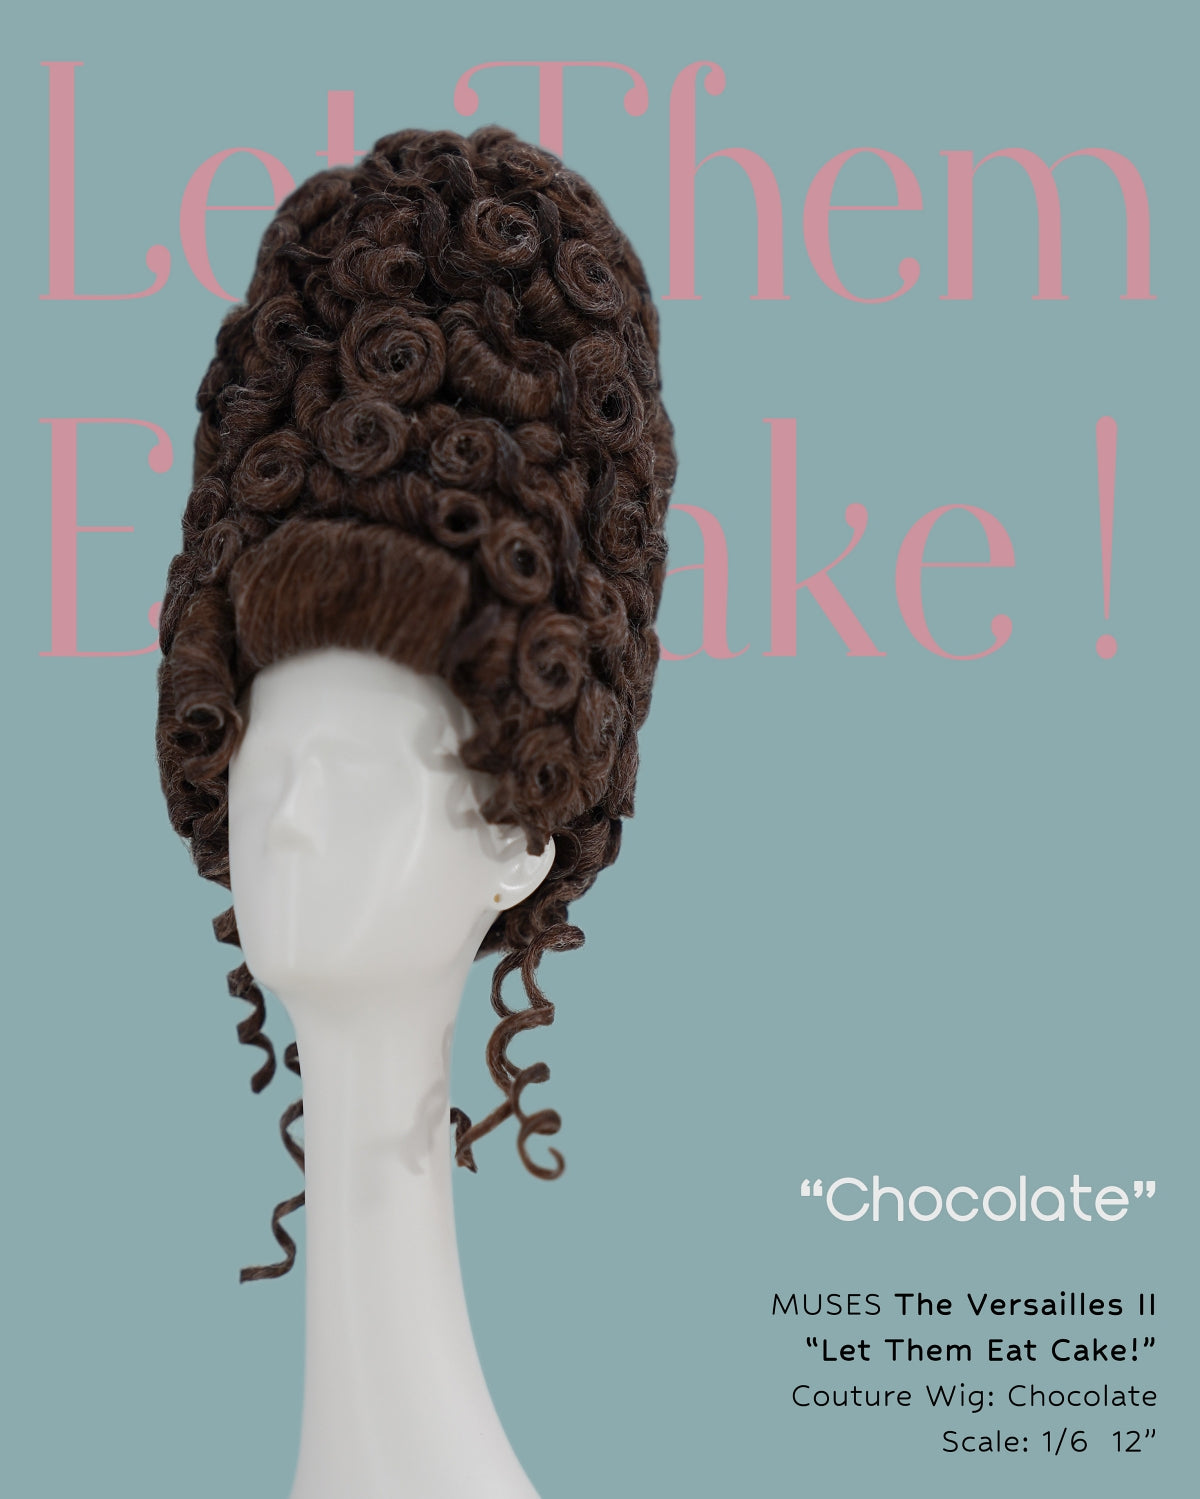 Versailles II "Let Them Eat Cake" Couture Wig Chocolate